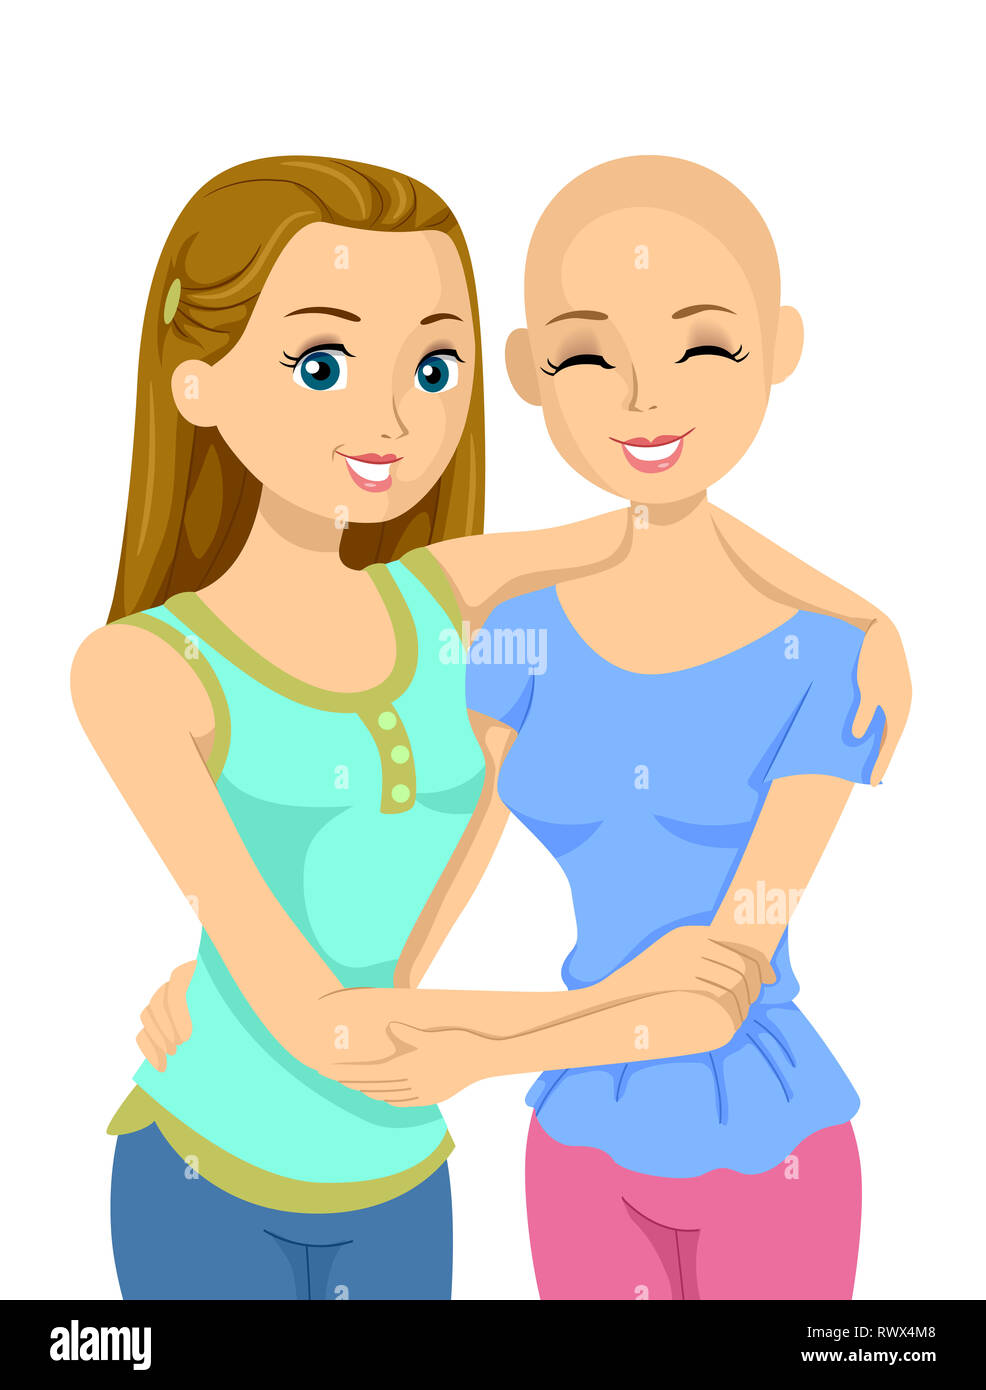 Illustration Of Teenage Girls With One Bald Girl Suffering From Alopecia Stock Photo Alamy | view 272 bald crazy lady illustration, images and graphics from +50,000 possibilities. https www alamy com illustration of teenage girls with one bald girl suffering from alopecia image239675640 html